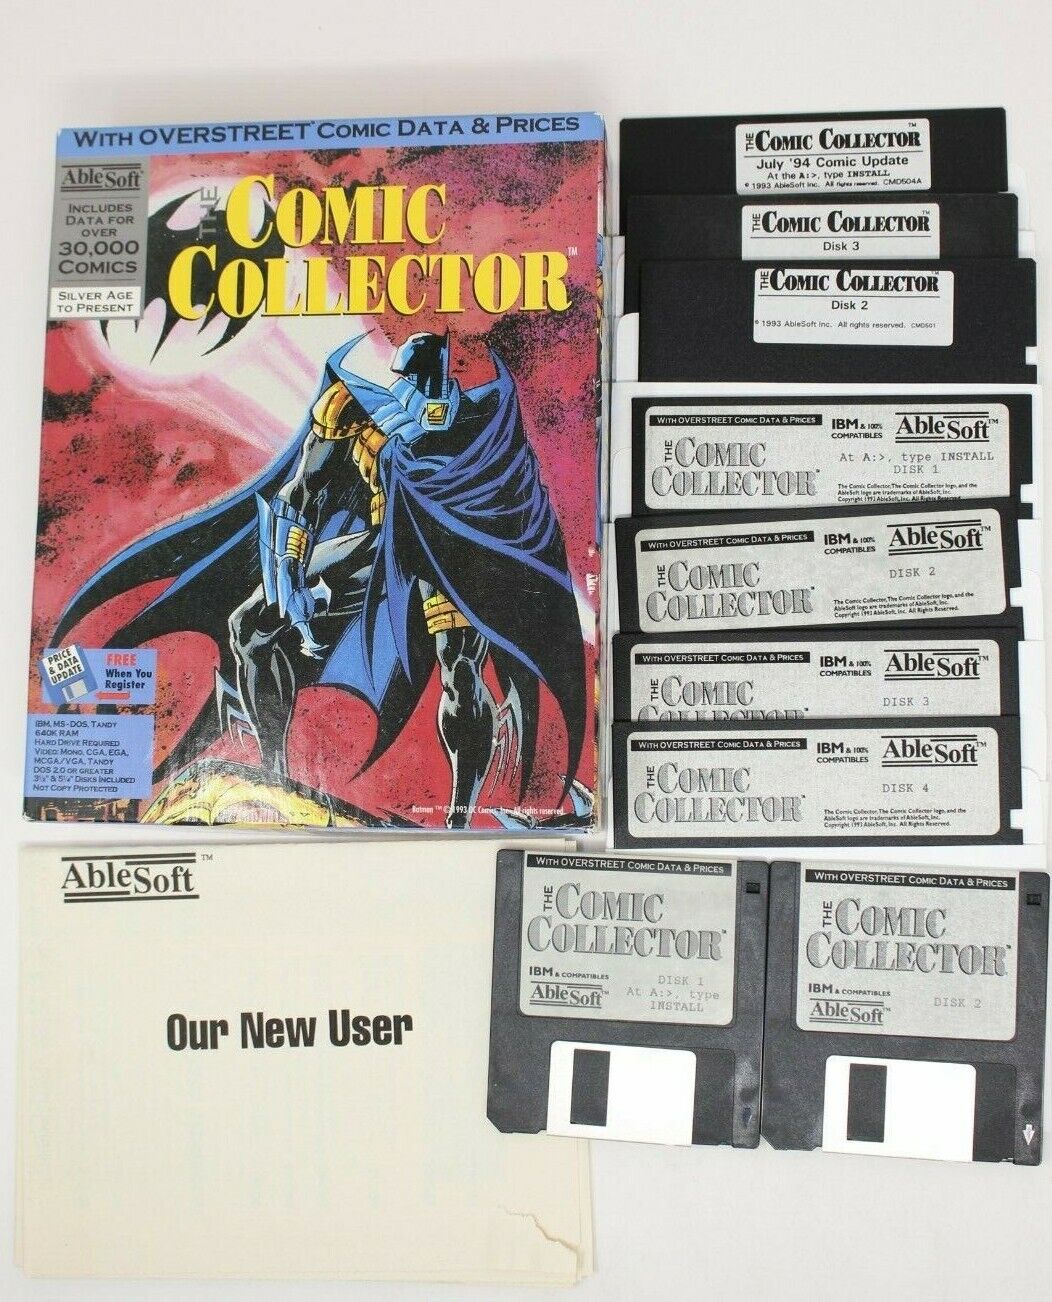 The Comic Collector IBM PC Game on 3.5\